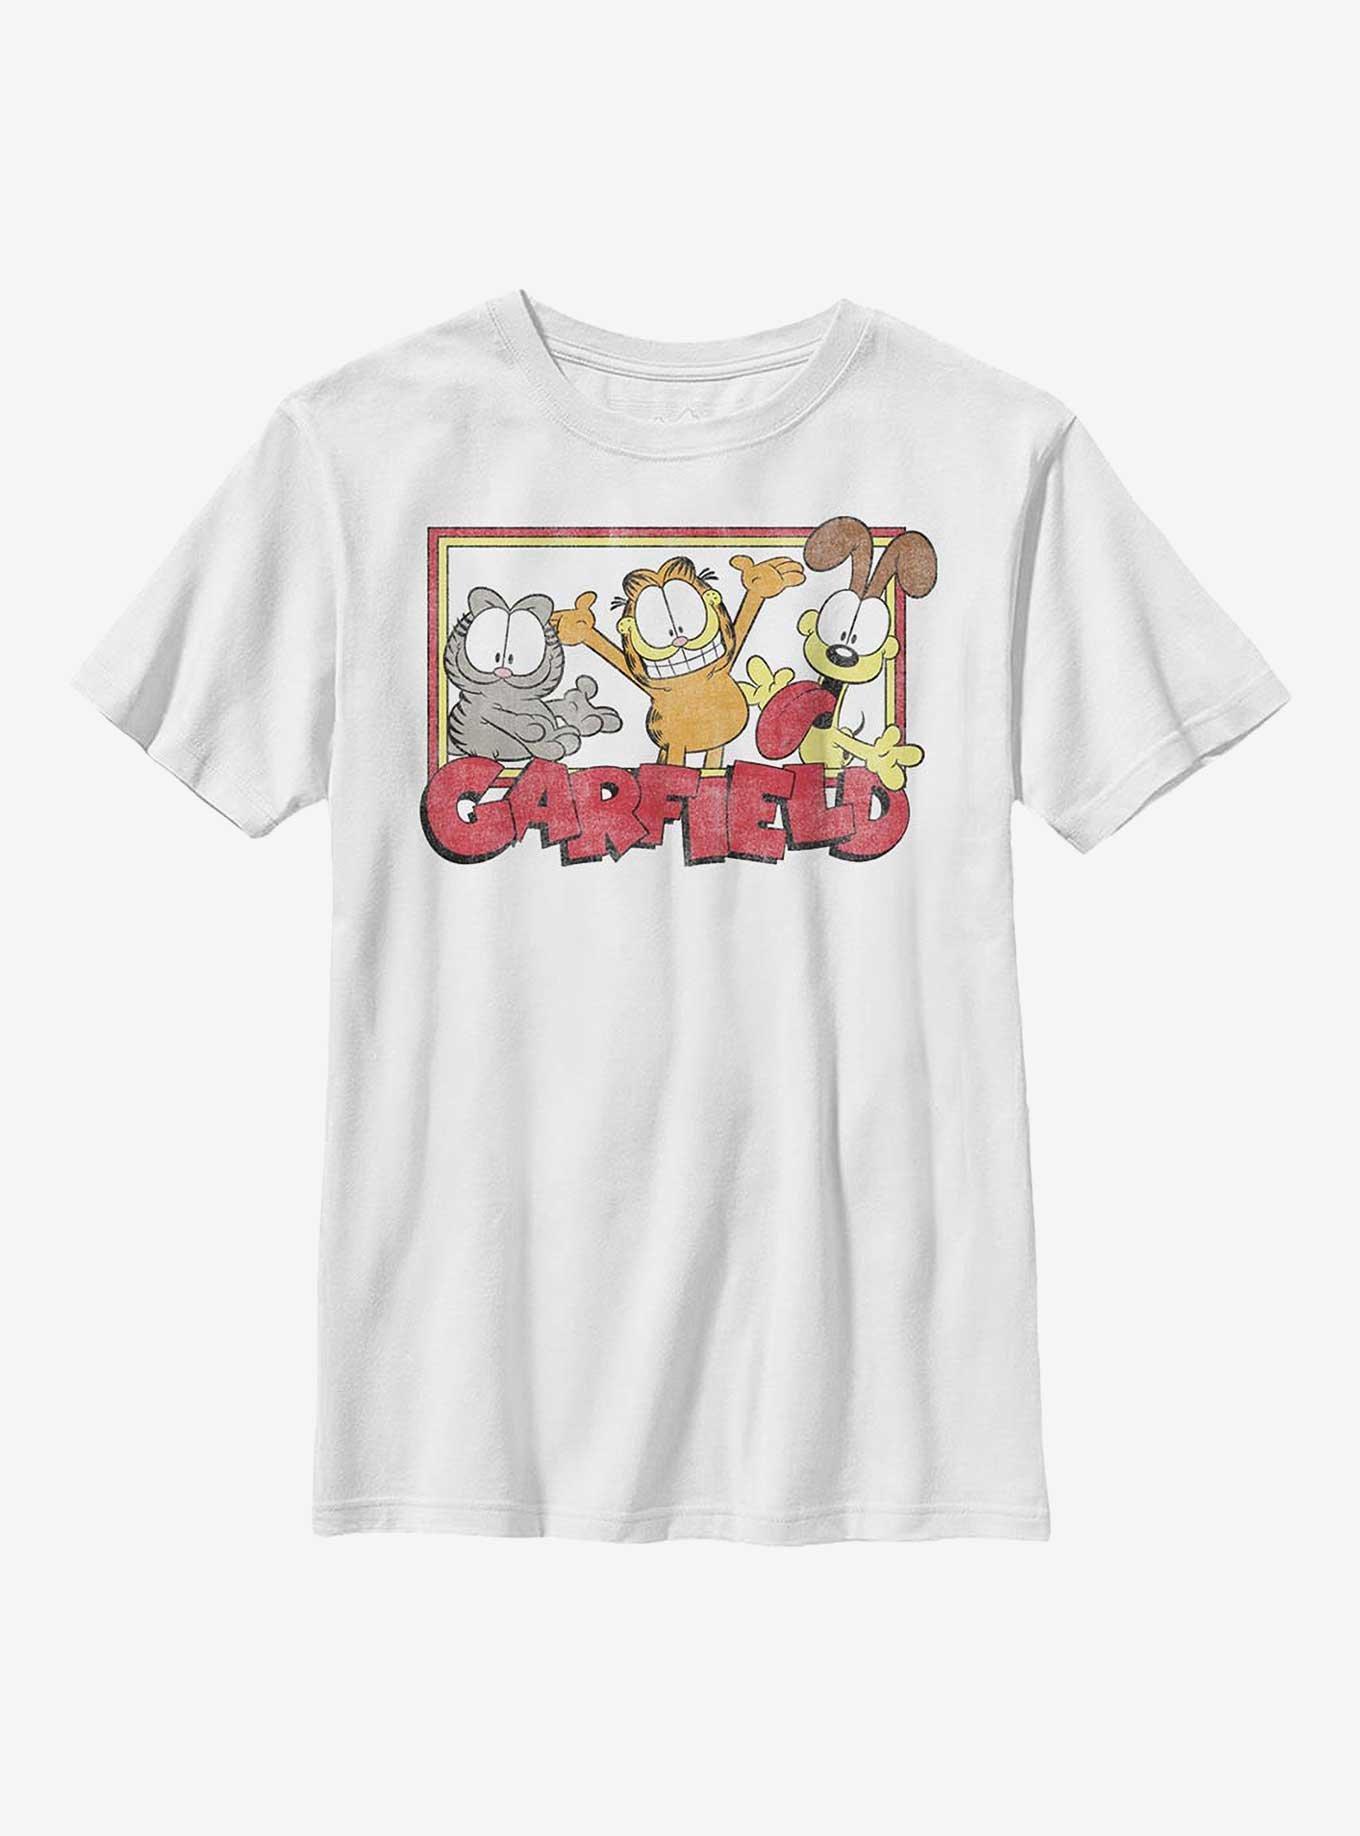 Garfield Nermal and Odie Youth T-Shirt, WHITE, hi-res